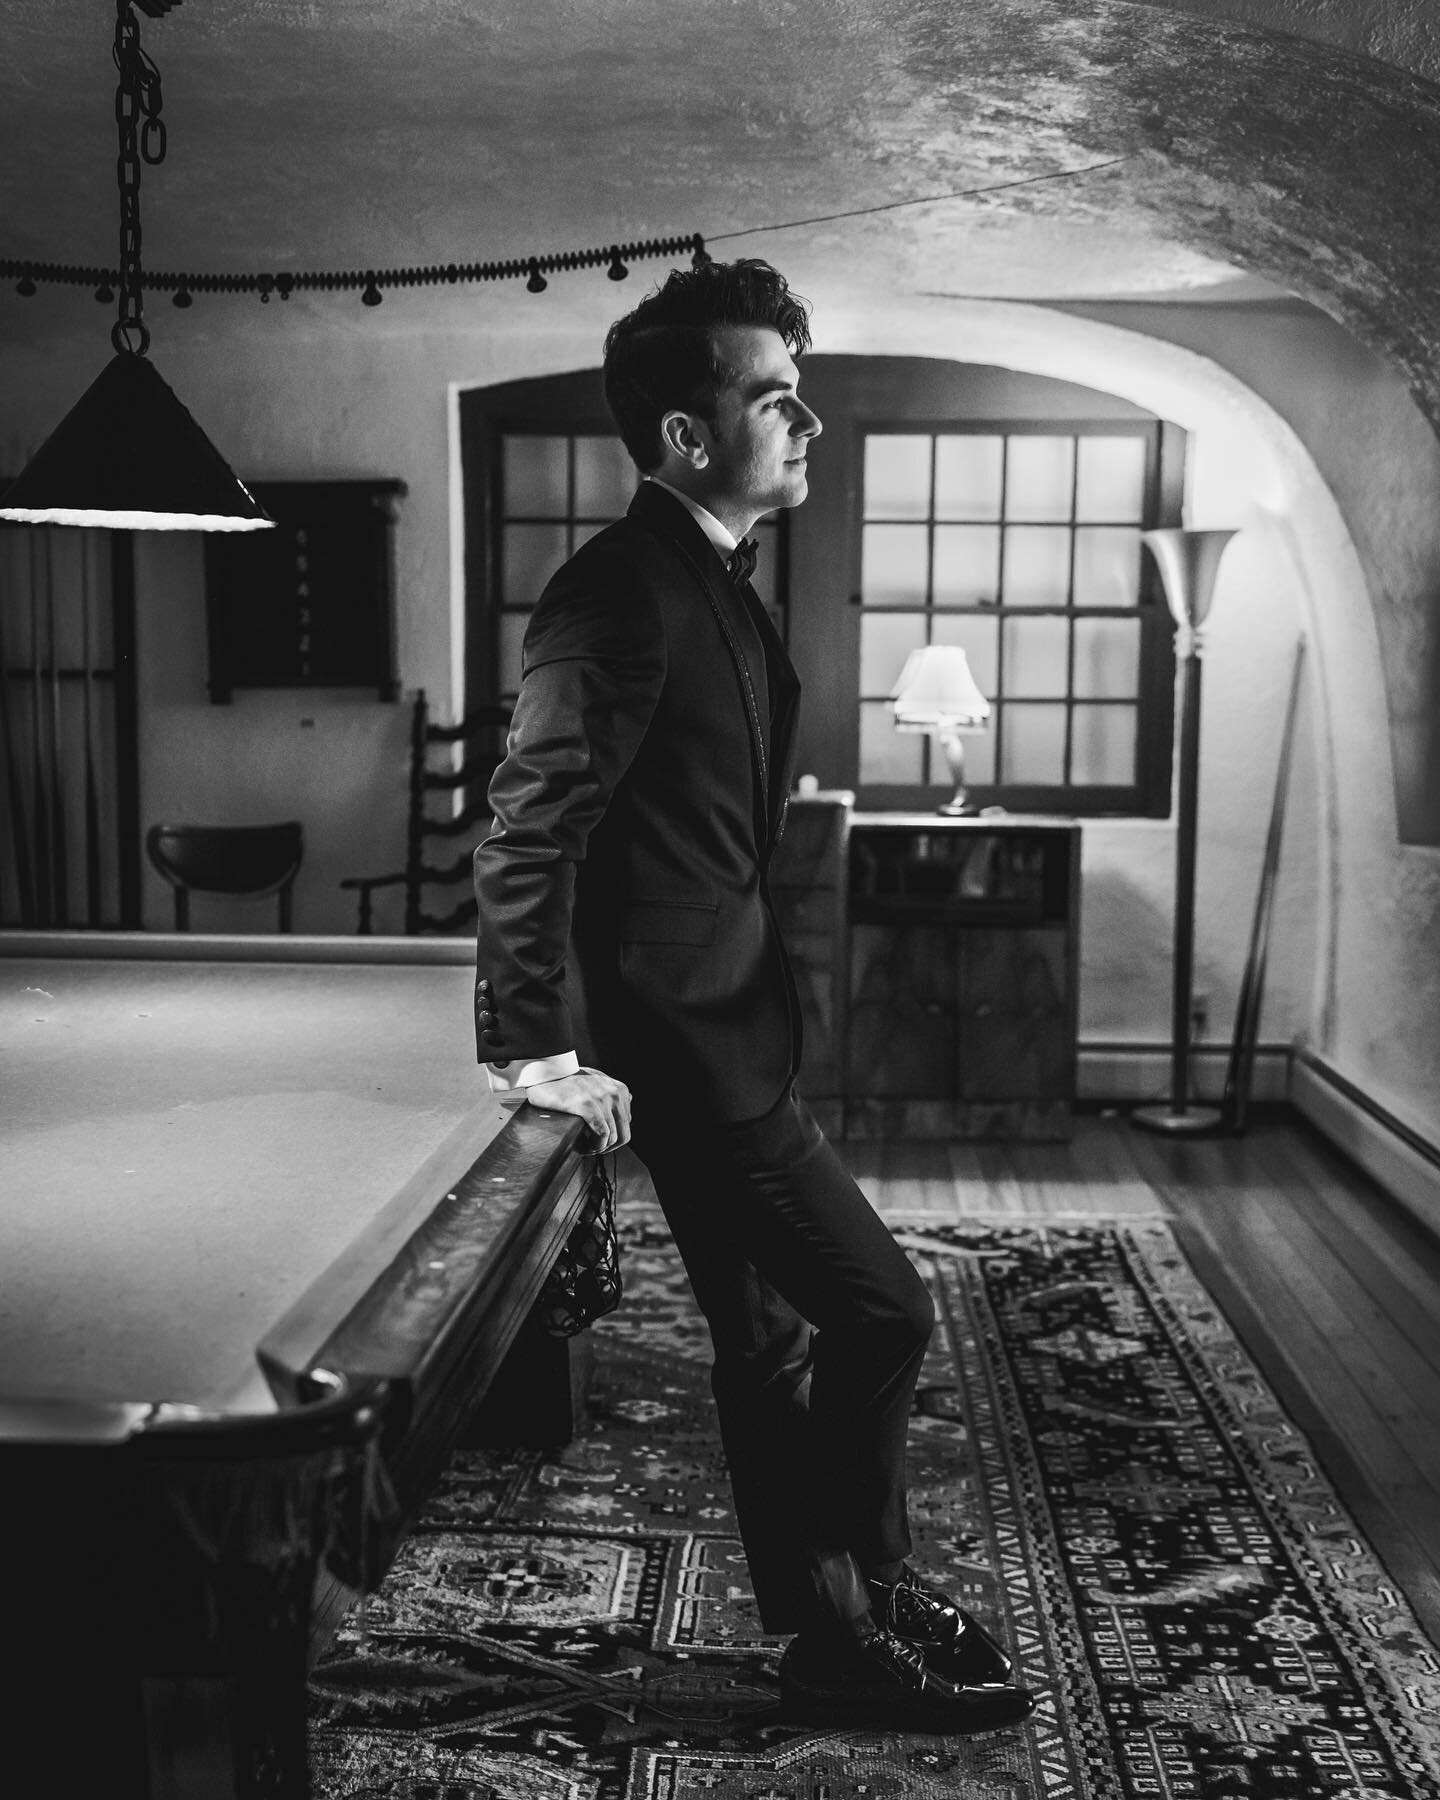 The venue at @onteoramountainhouse had a cool pool table area and it lent itself to a moody shot of Mike, the groom. 
.
.

#hudsonvalleyny #hudsonvalleywedding #upstatenywedding #upstatenyweddingphotographer #wedding #bride #weddingday  #nywedding #w